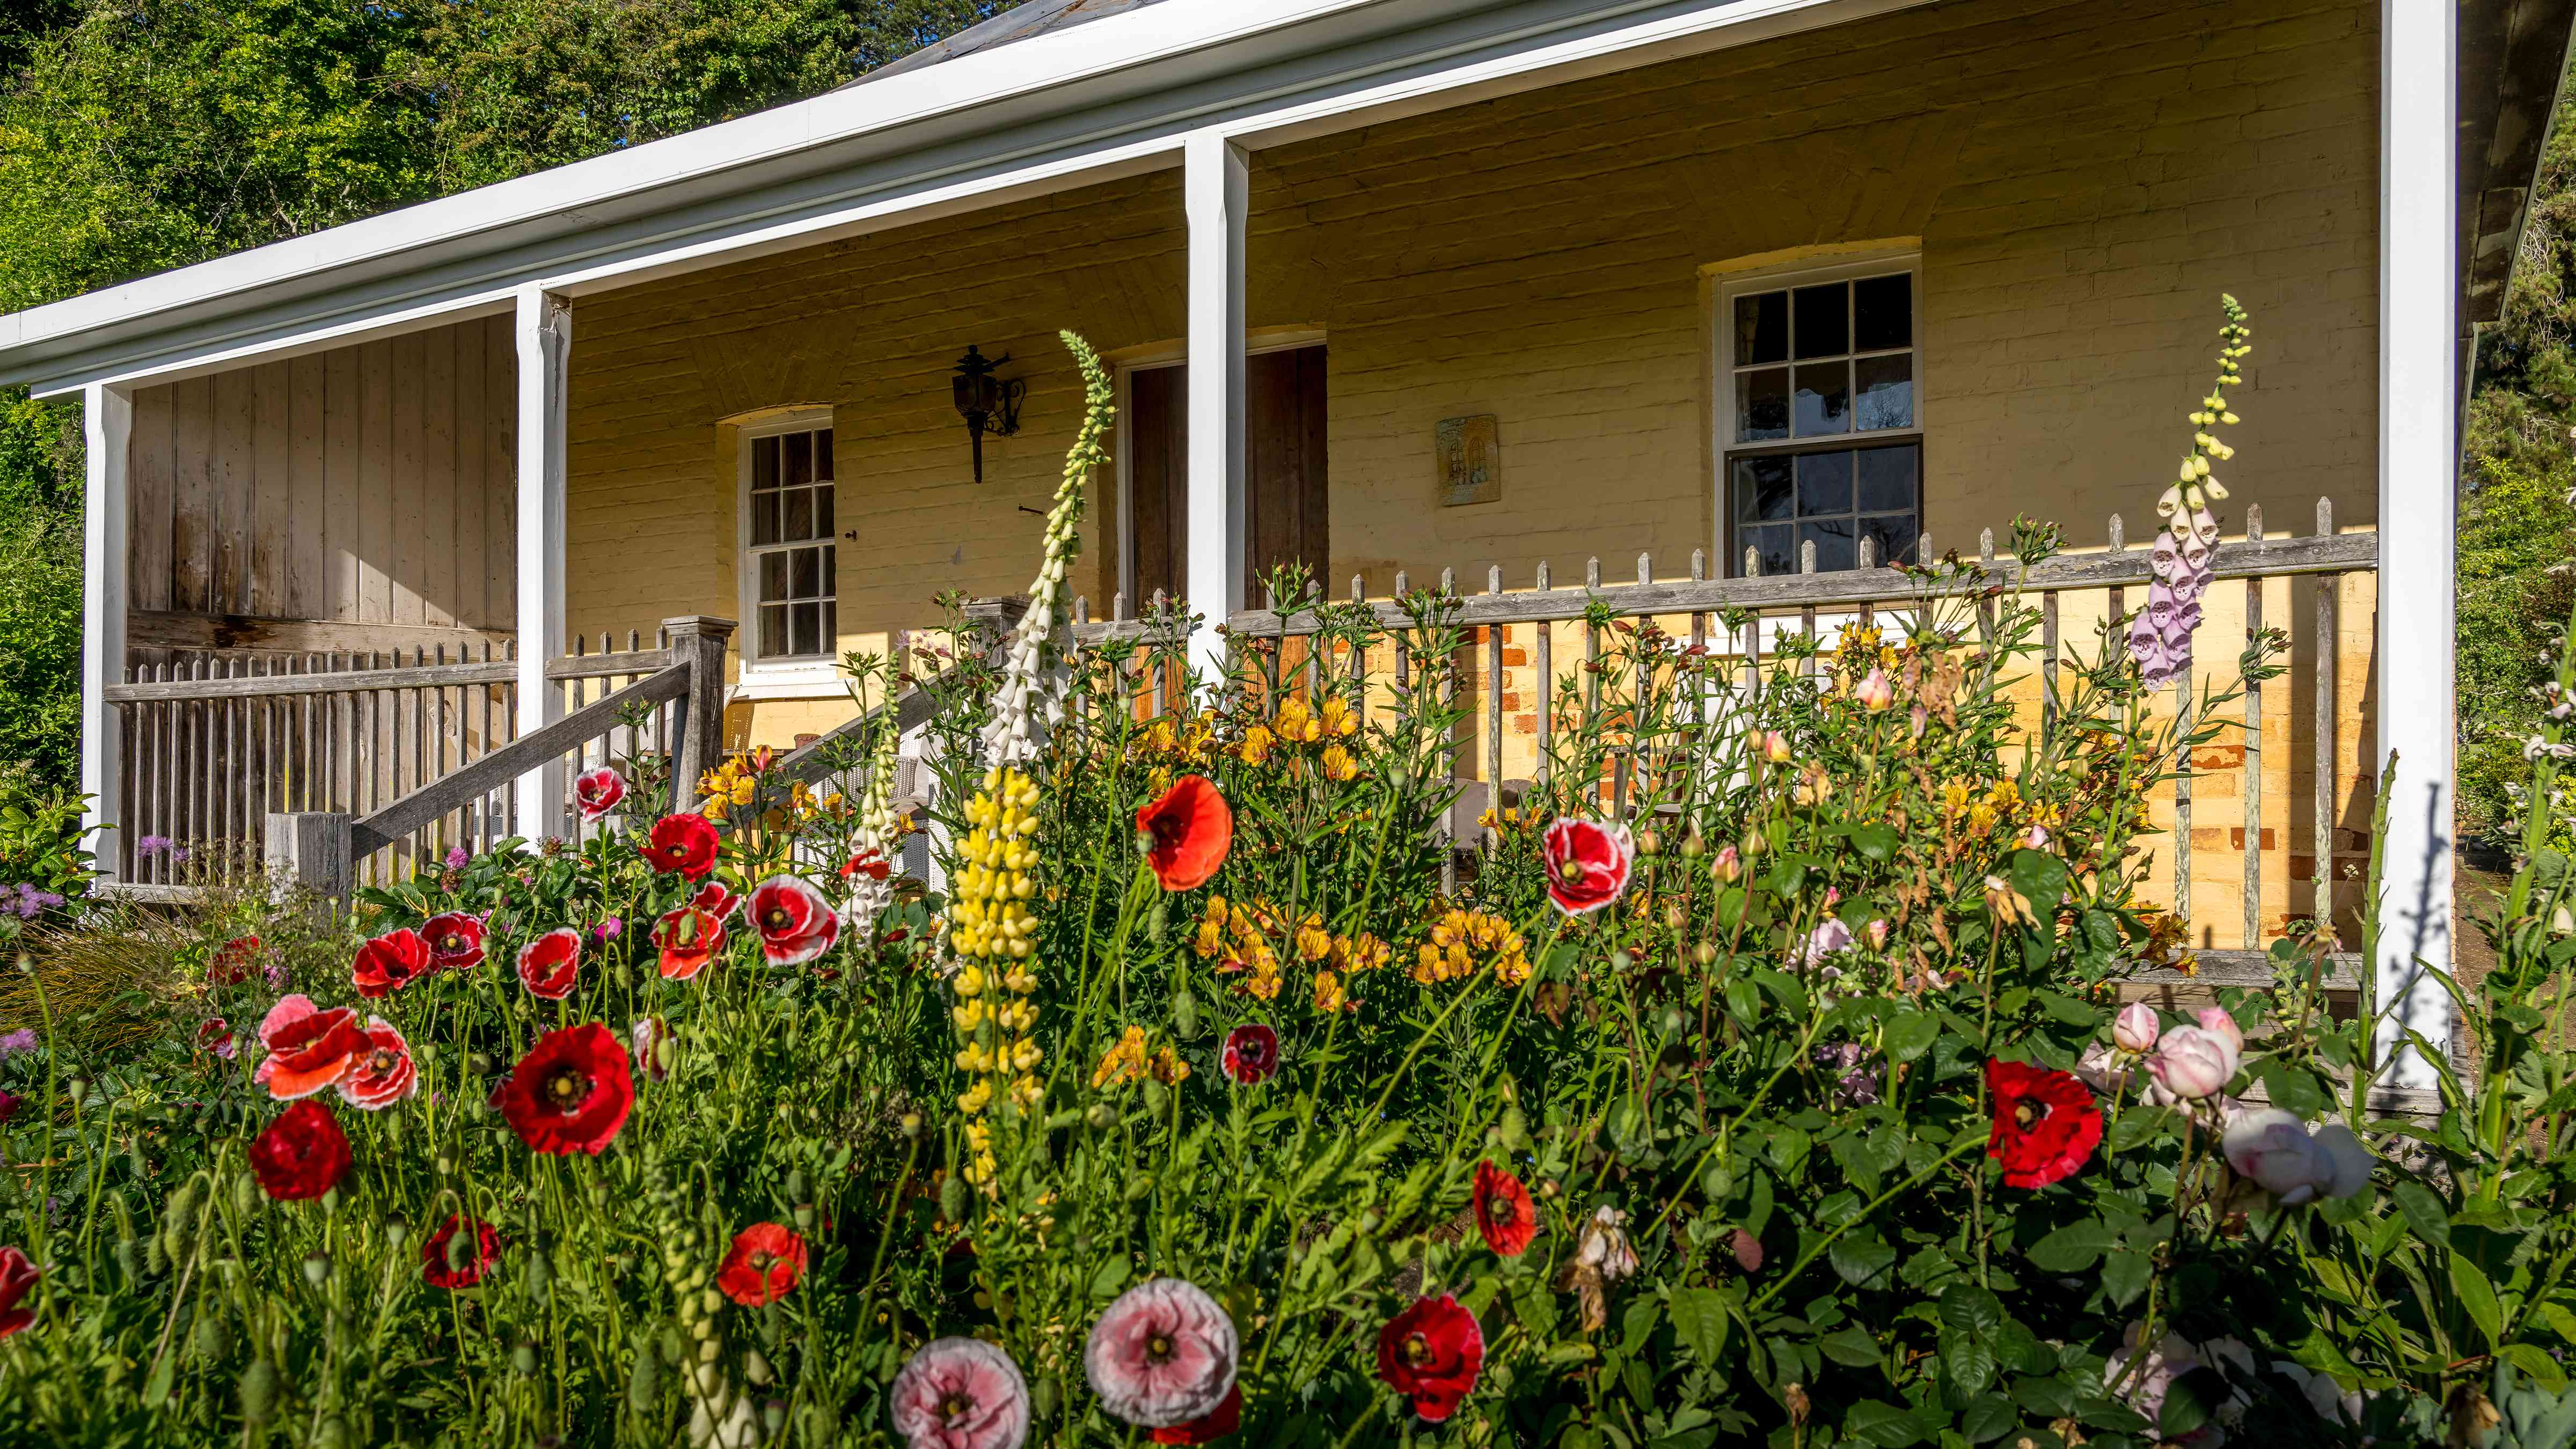 The foreground is a cottage garden with flowering pink, red and purple ornamental poppies, yellow hollyhocks and yellow astilbe with green foliage. Behind the garden is a timber picket fenced verandah and the cottage has pale yellow walls, two Georgian paned windows and a timber front door. Four white verandah posts and a white gutter frame the verandah. Photo: Rob Burnett.